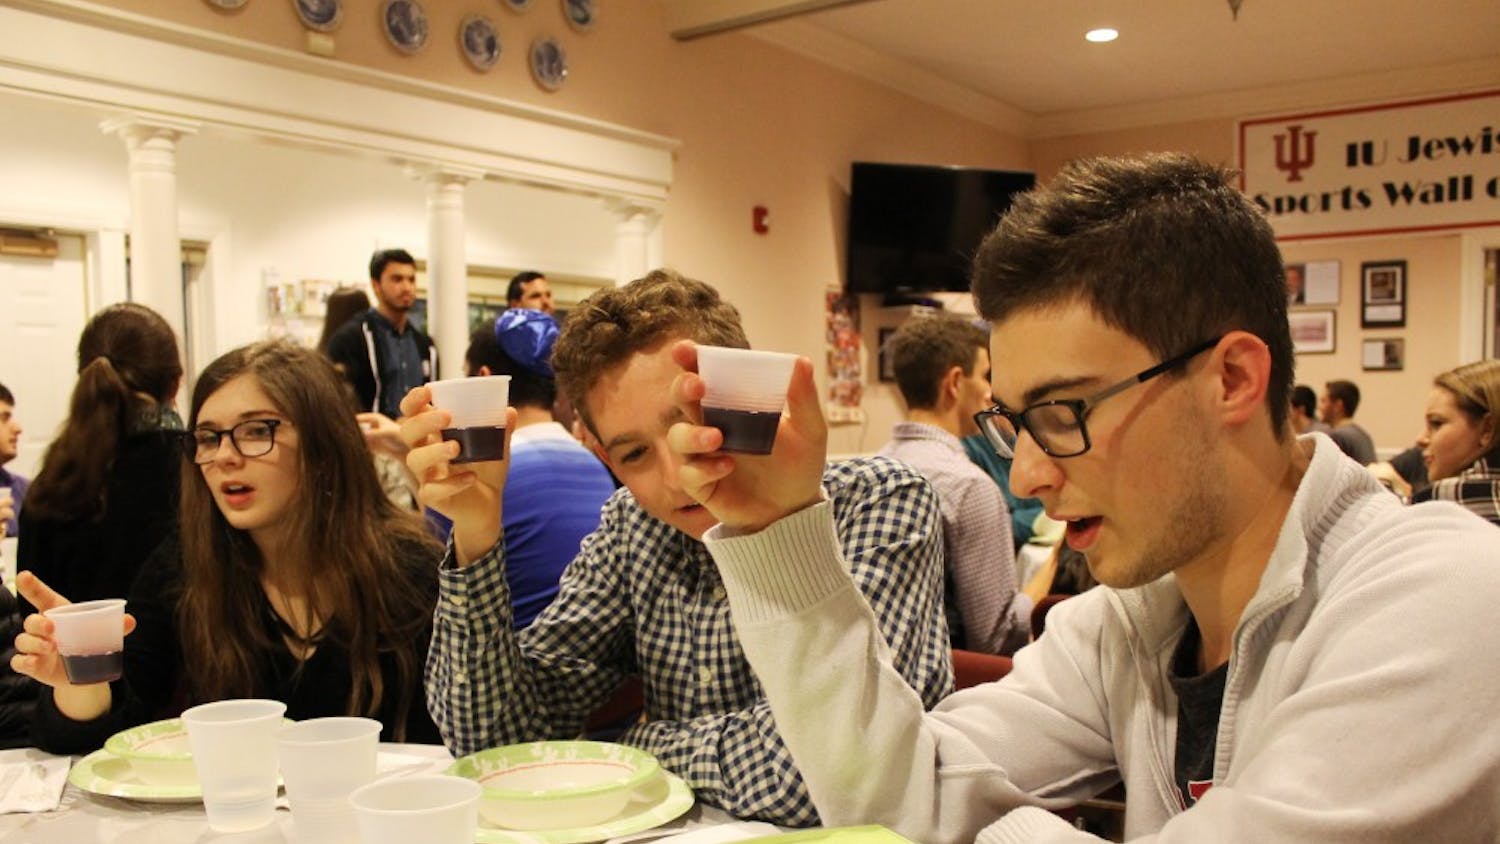 IU students Olivia Turi, Evan Weis and Max Gruenberg raise cups of grape juice during a pre-meal blessing in January 2017 at the Helene G. Simon Hillel Canter. Hillel is one of the many religious organizations on campus.